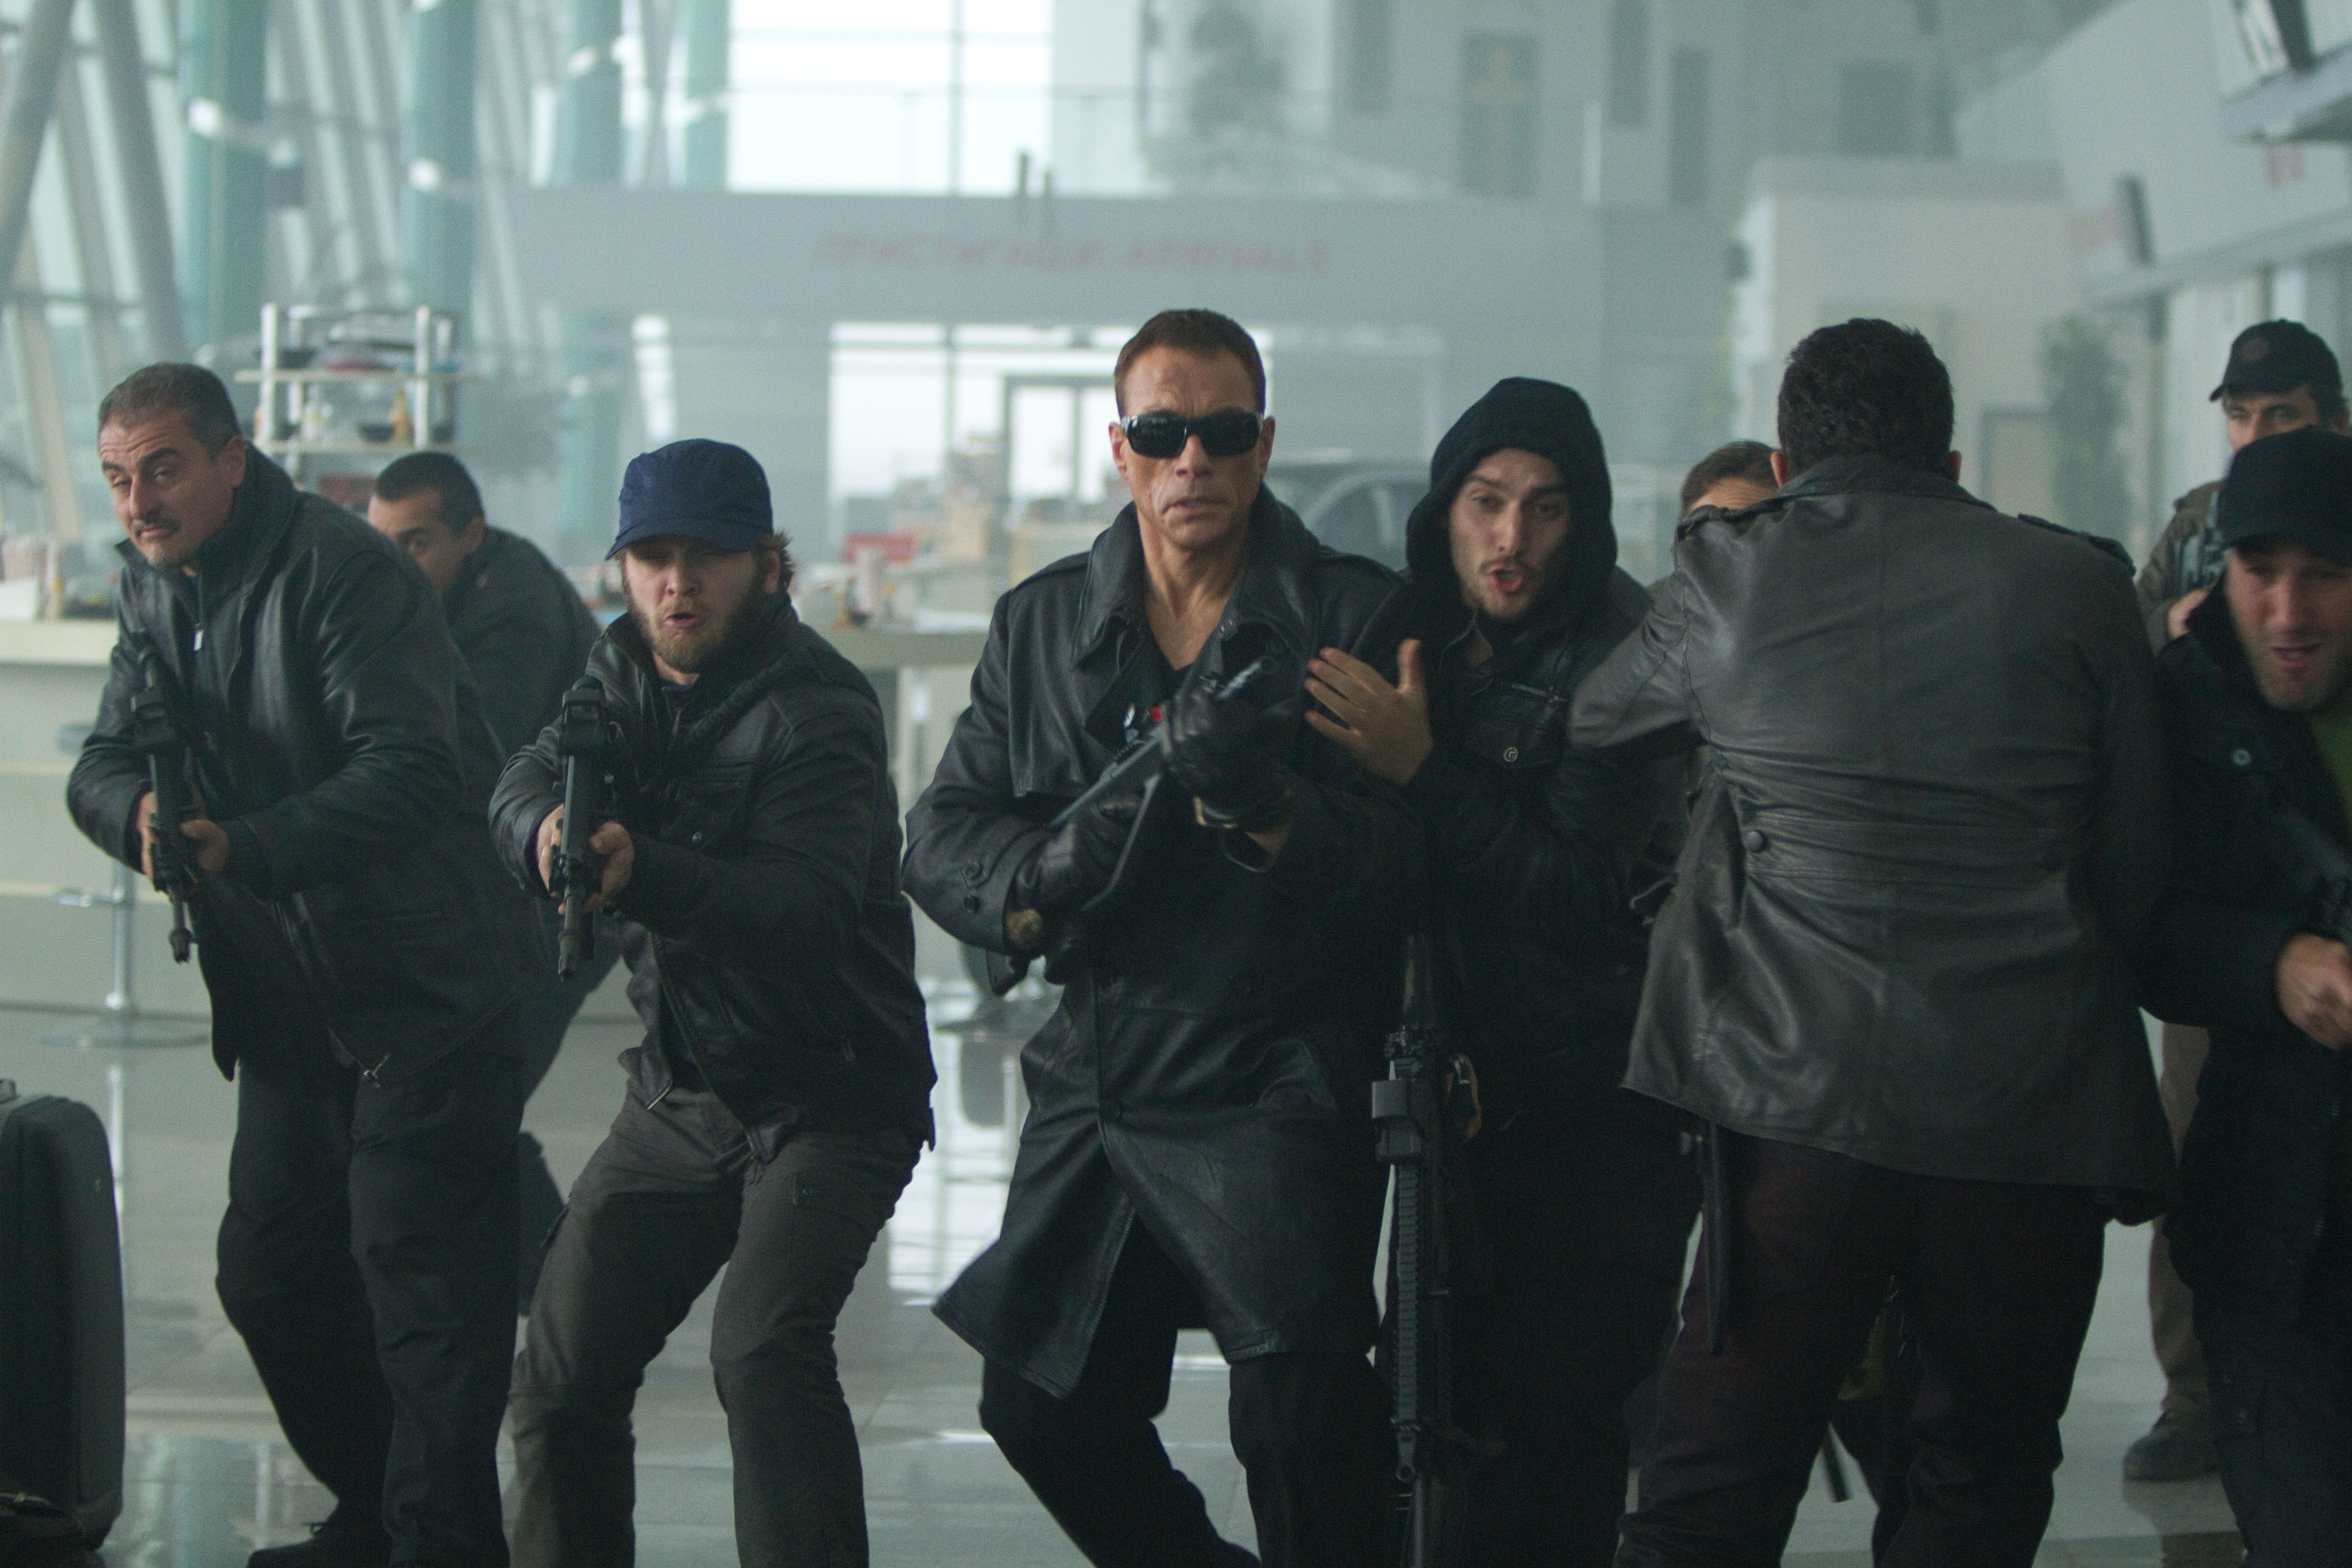 Movie The Expendables 2 HD Wallpaper | Background Image